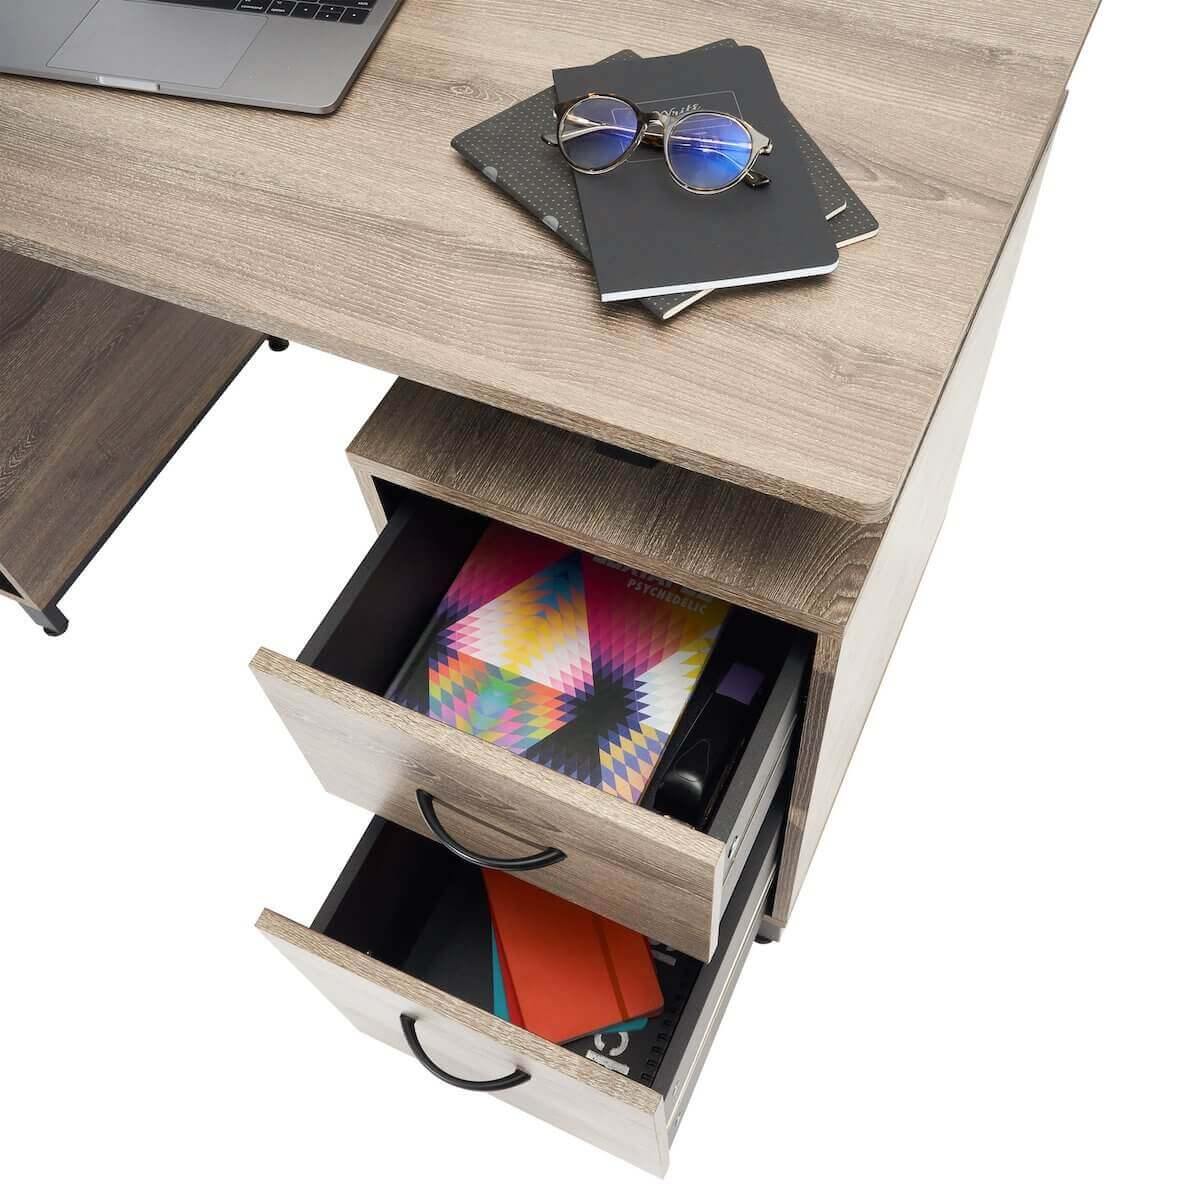 Techni Mobili Gray Computer Desk with Storage RTA-0054-GRY Open Drawers